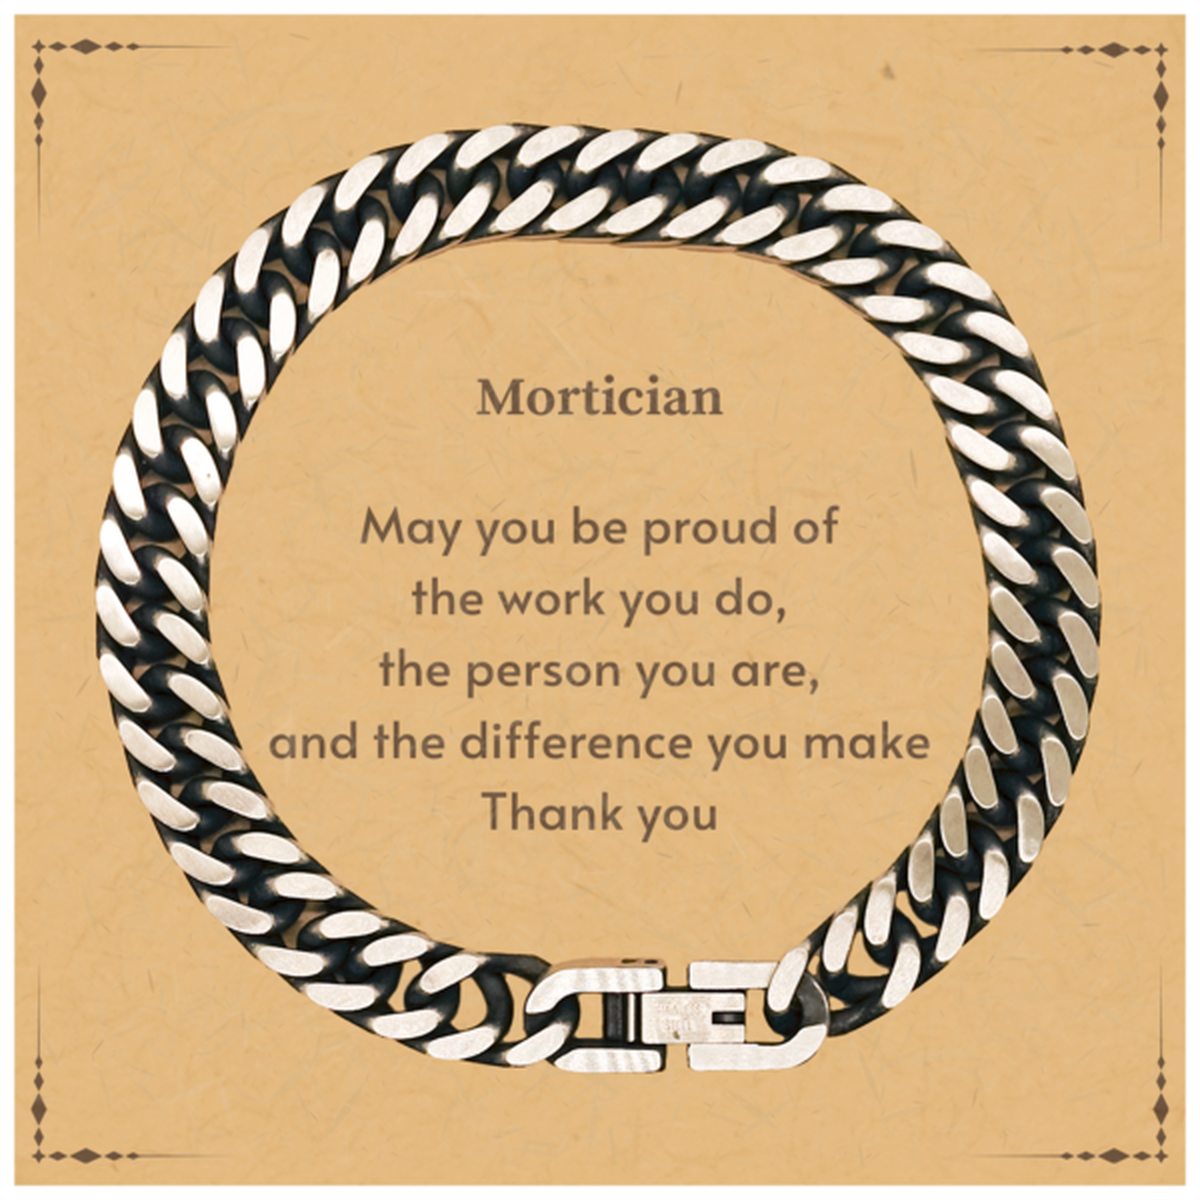 Heartwarming Cuban Link Chain Bracelet Retirement Coworkers Gifts for Mortician, Mortician May You be proud of the work you do, the person you are Gifts for Boss Men Women Friends